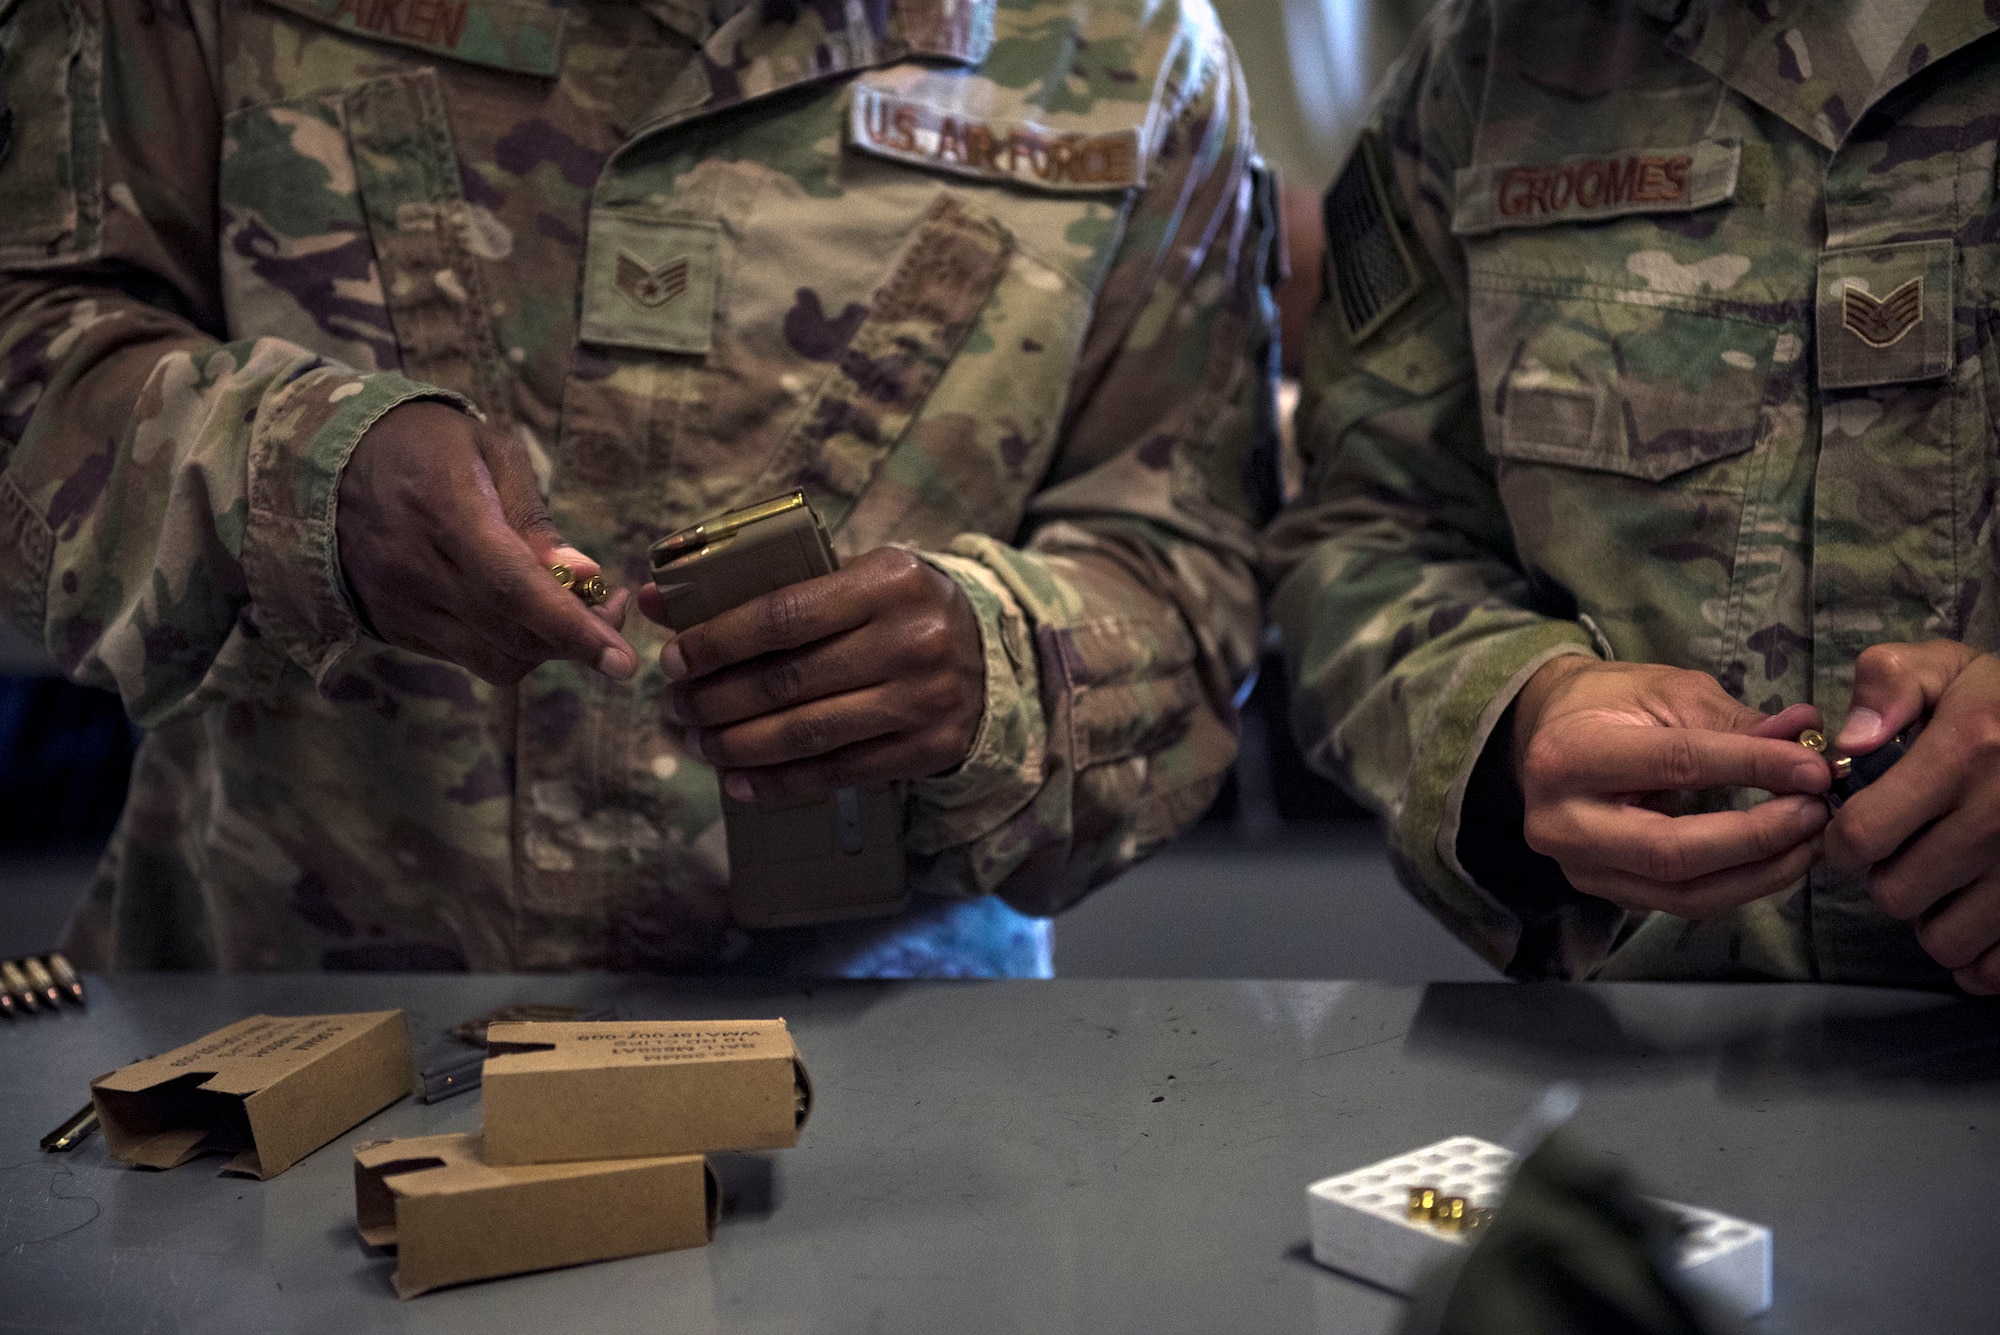 Defenders from the 822d Base Defense Squadron load ammunition into magazines prior to departing Moody Air Force Base, Ga., to provide base security at Tyndall AFB, Fla., during Hurricane Michael recovery efforts, Oct. 11, 2018. Moody’s ‘Safeside’ defenders will secure the area as Tyndall’s Ride Out Element conducts damage assessments during the aftermath. Since Oct. 8 and until further notice, Tyndall has been on evacuation notice. (U.S. Air Force photo by Senior Airman Greg Nash)